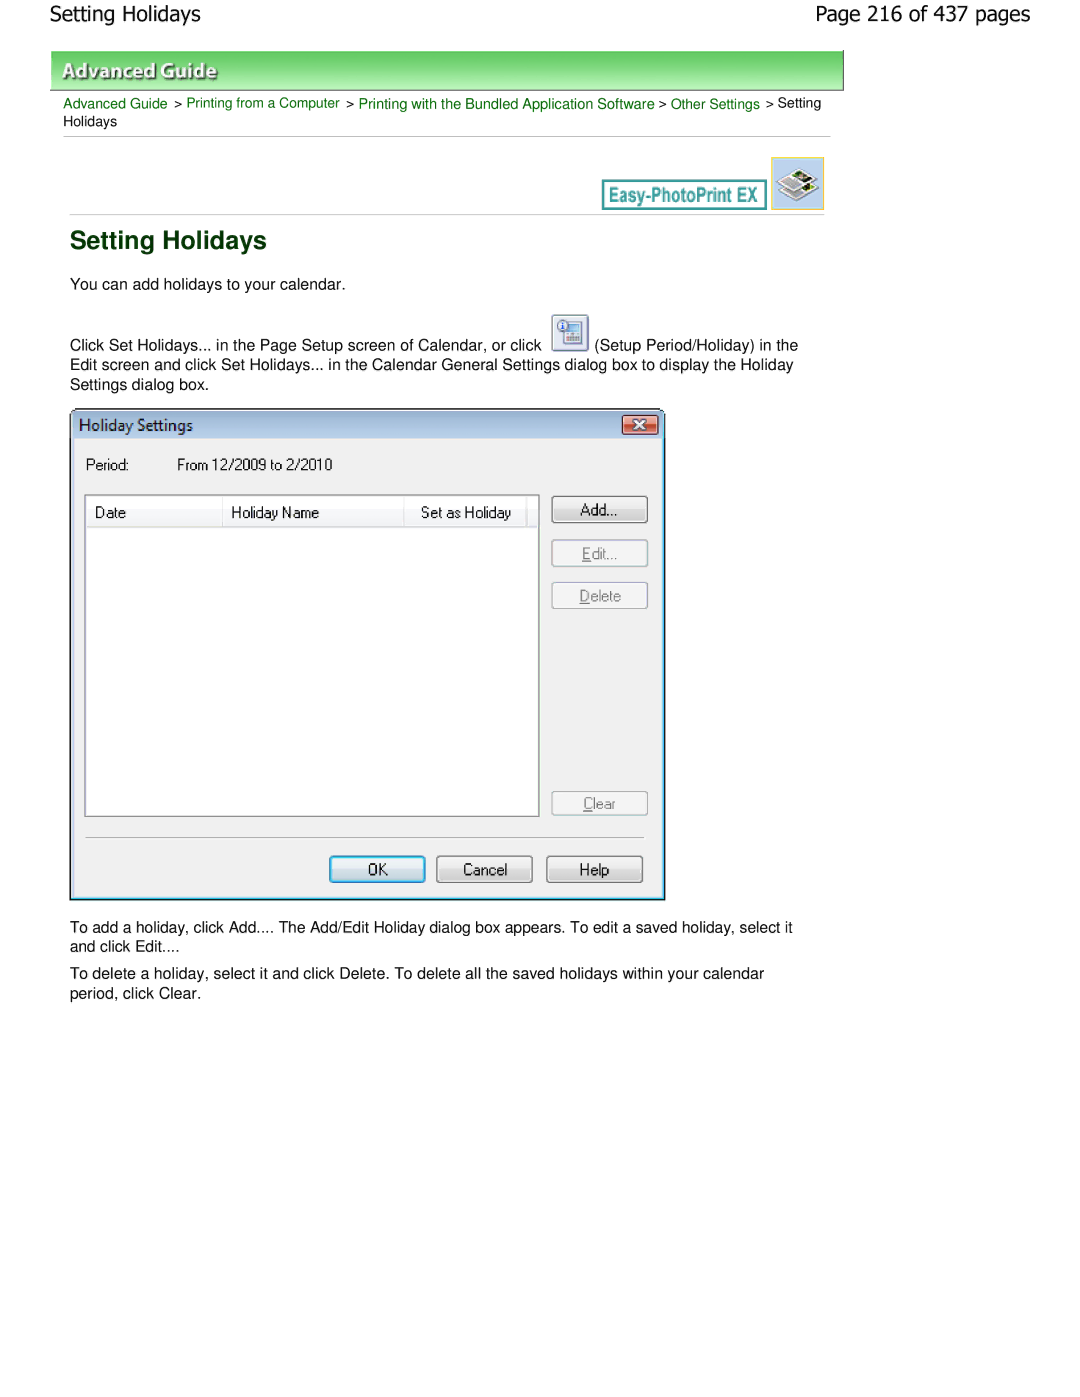 Canon iP4700 manual Setting Holidays, 216 of 437 pages 